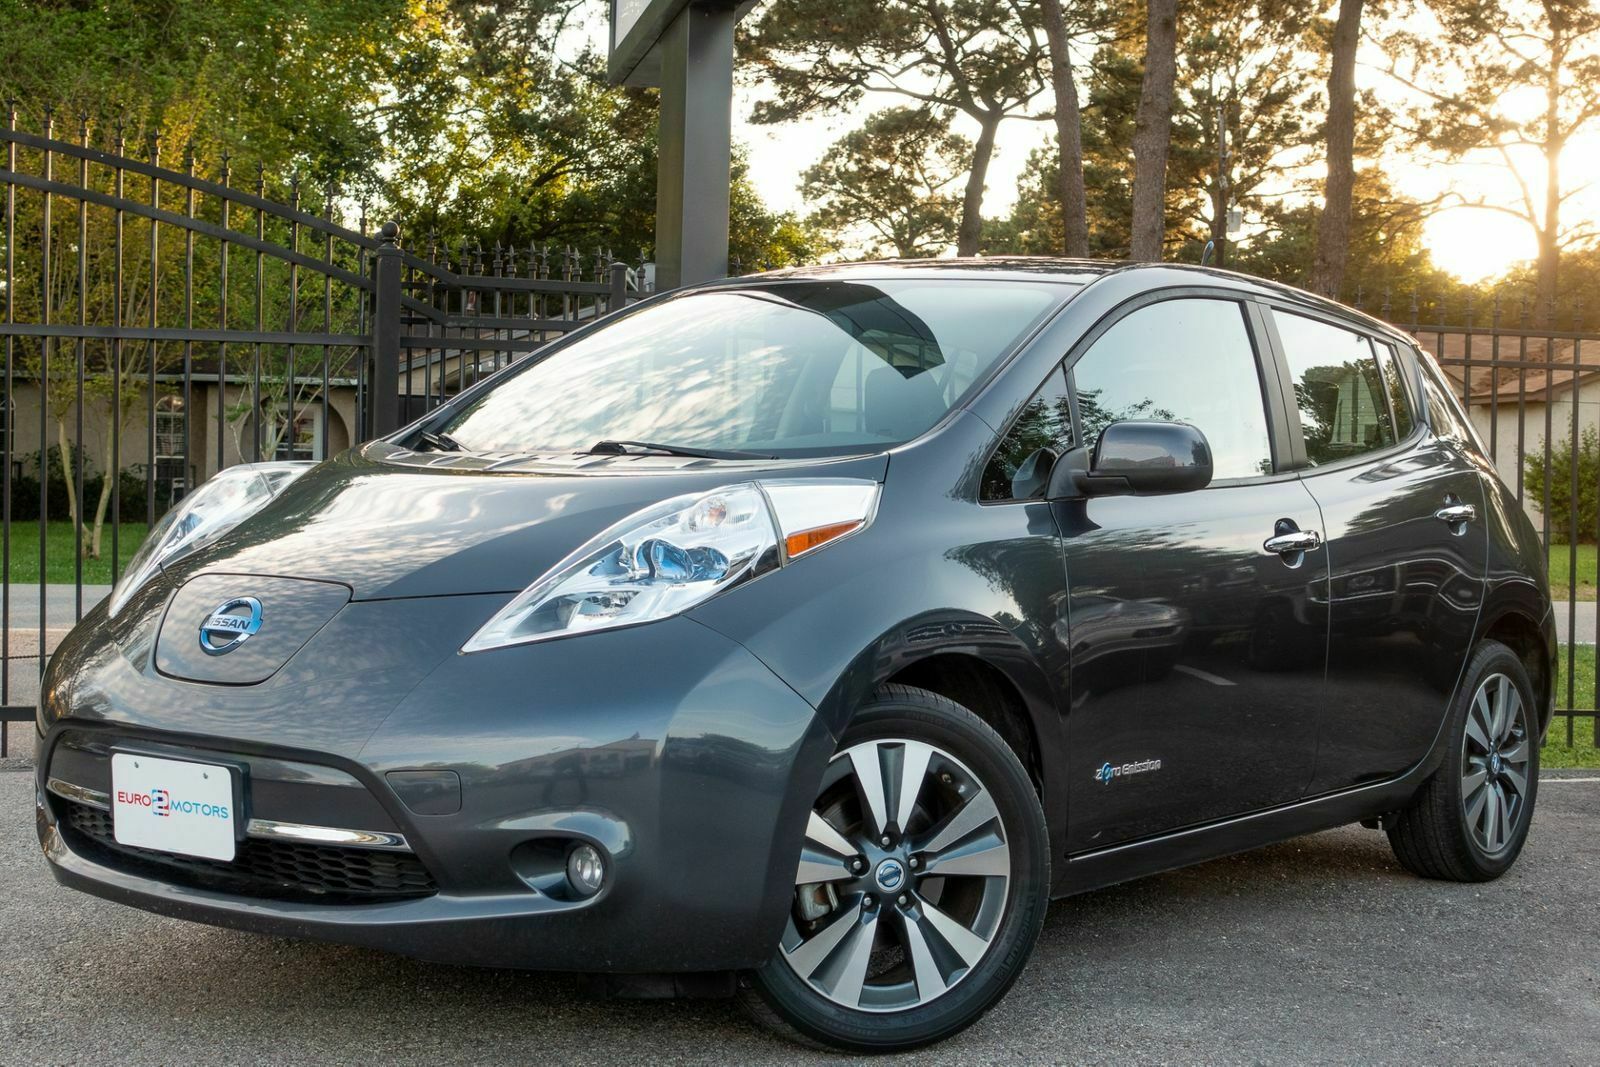 If you have access to charging, the Nissan Leaf EV could be a great delivery car.